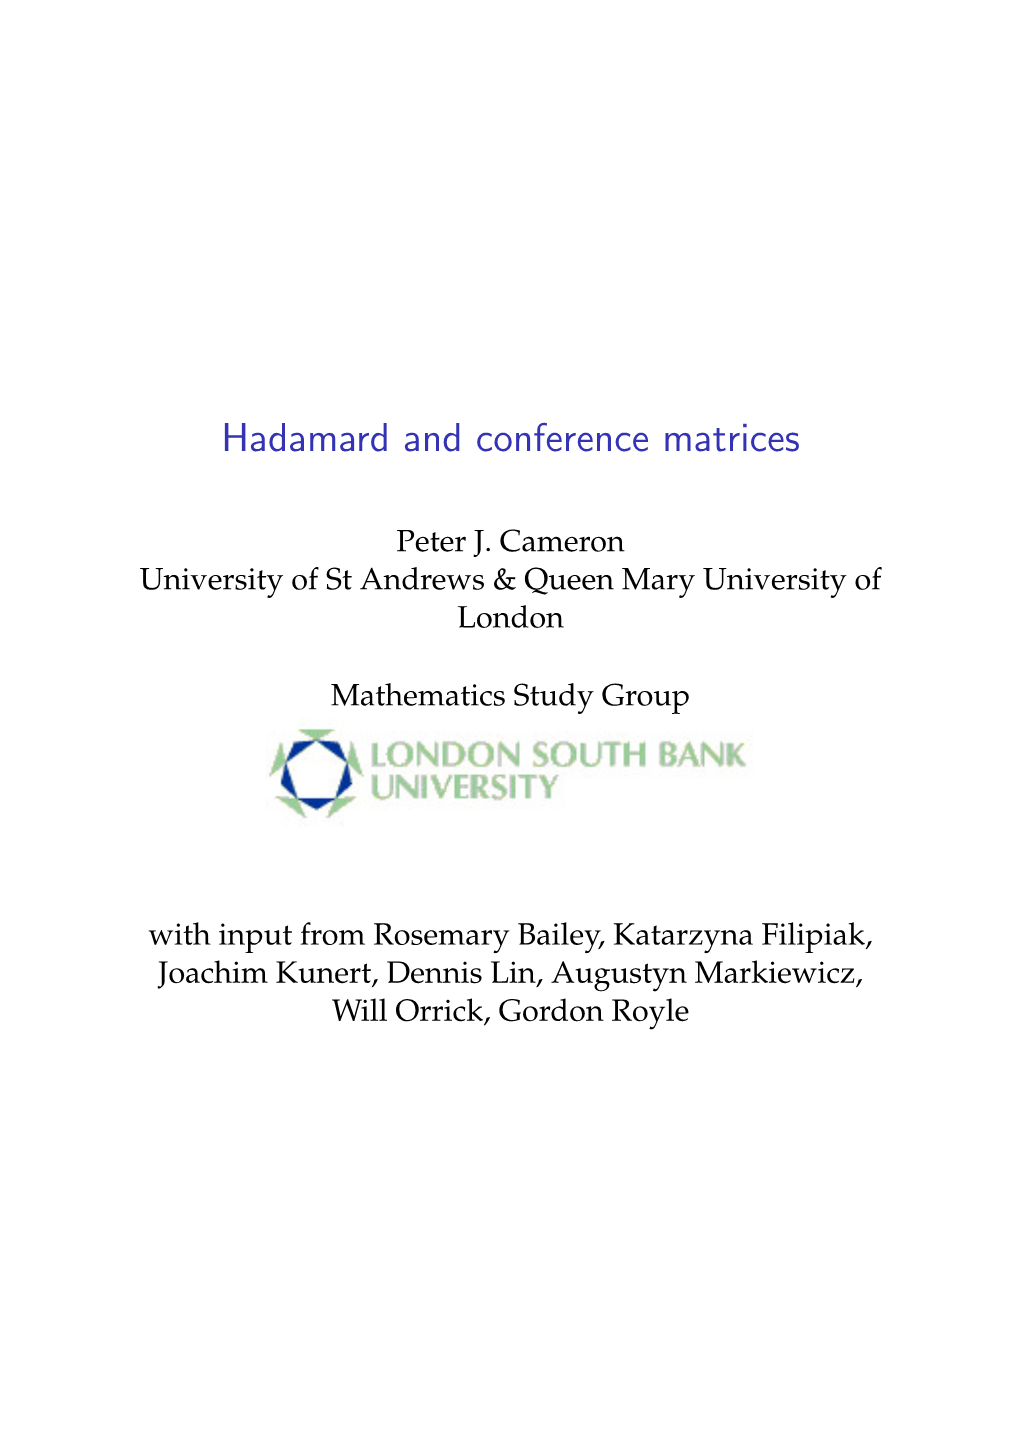 Hadamard and Conference Matrices